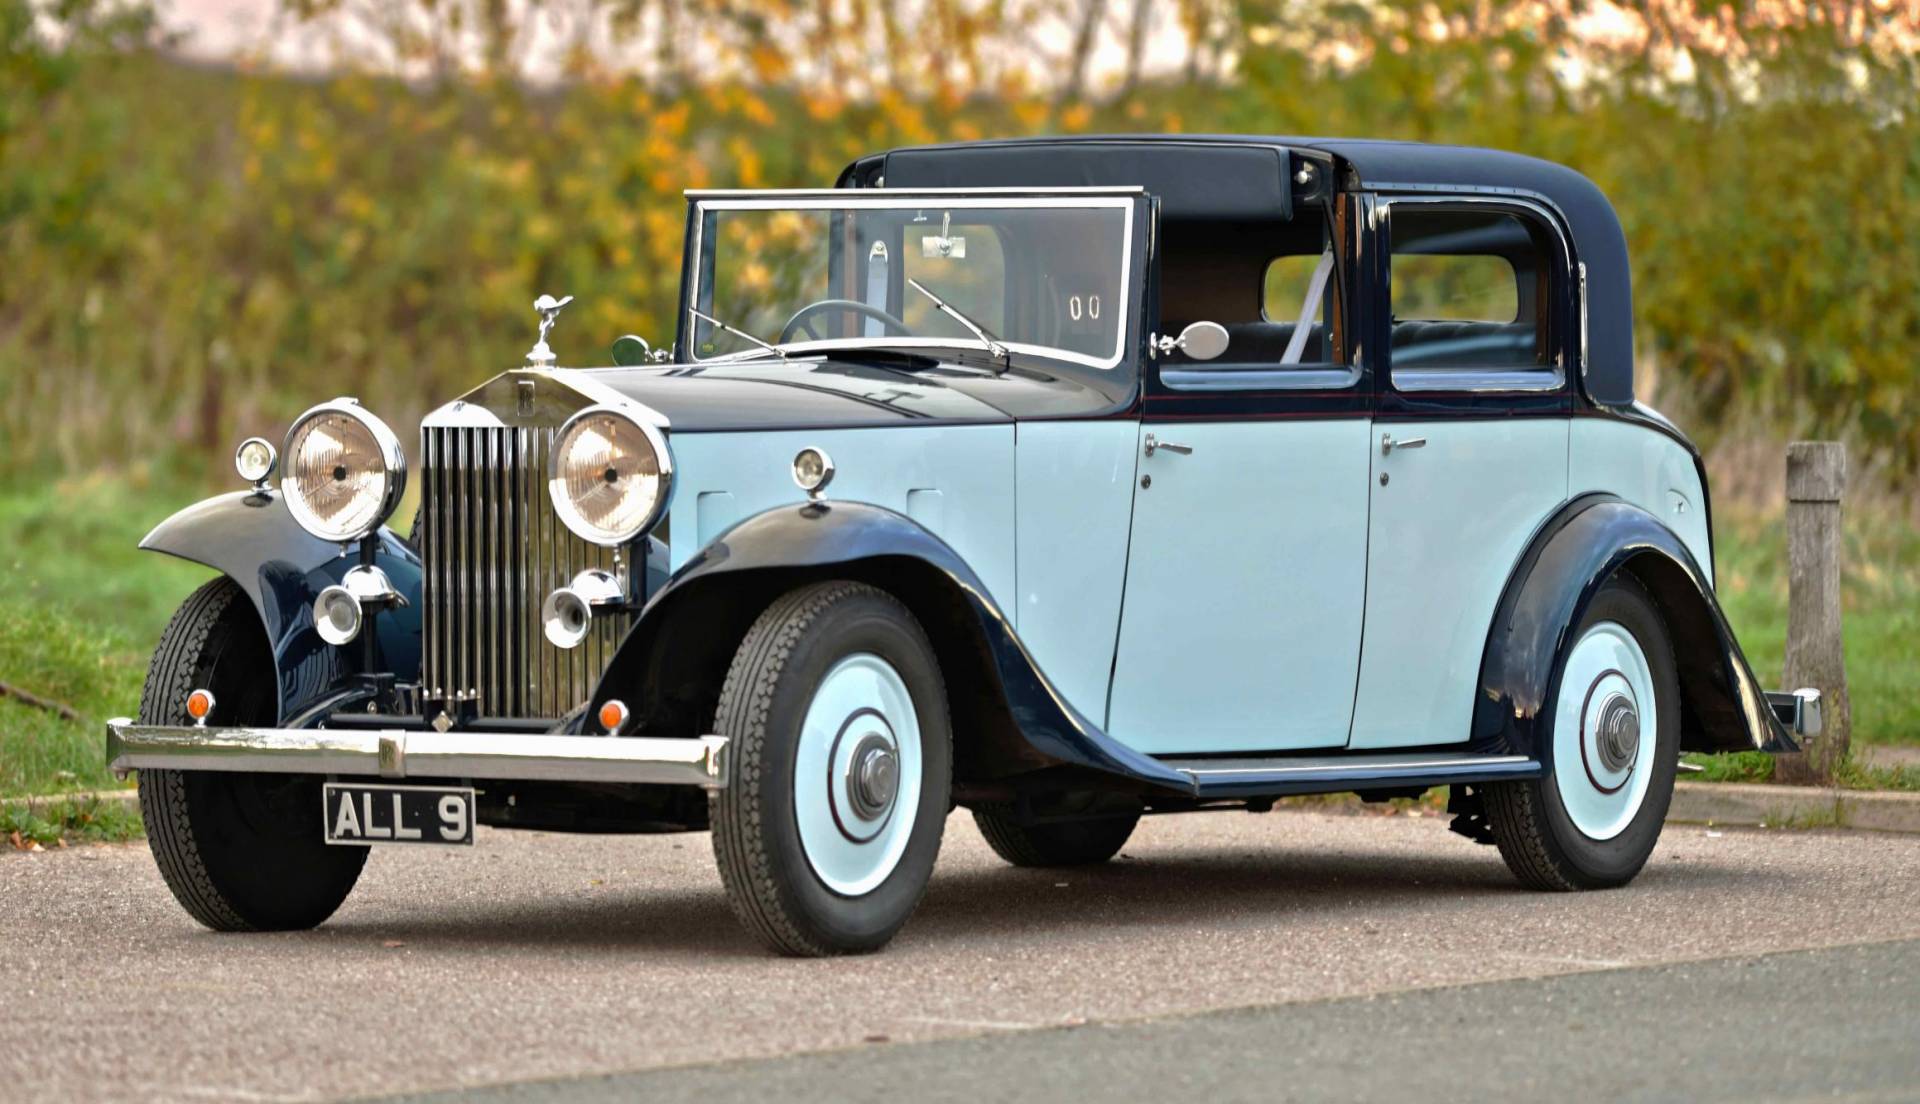 1929 RollsRoyce 2025 is listed Sold on ClassicDigest in Grays by Vintage  Prestige for 56000  ClassicDigestcom